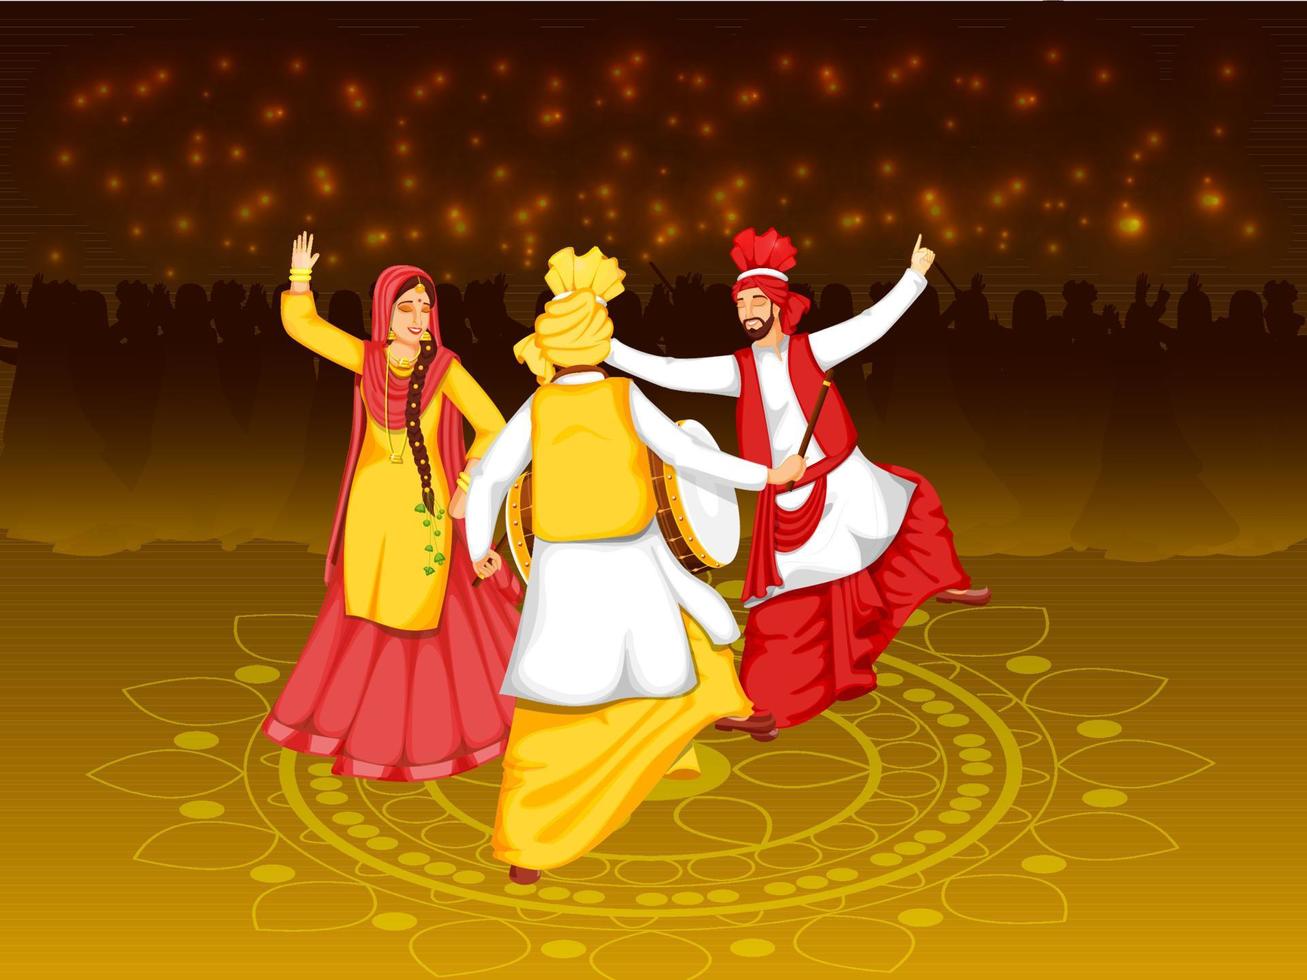 Illustration Of Punjabi People Doing Bhangra Dance With Dhol Instrument On Brown Lights Effect Background. vector